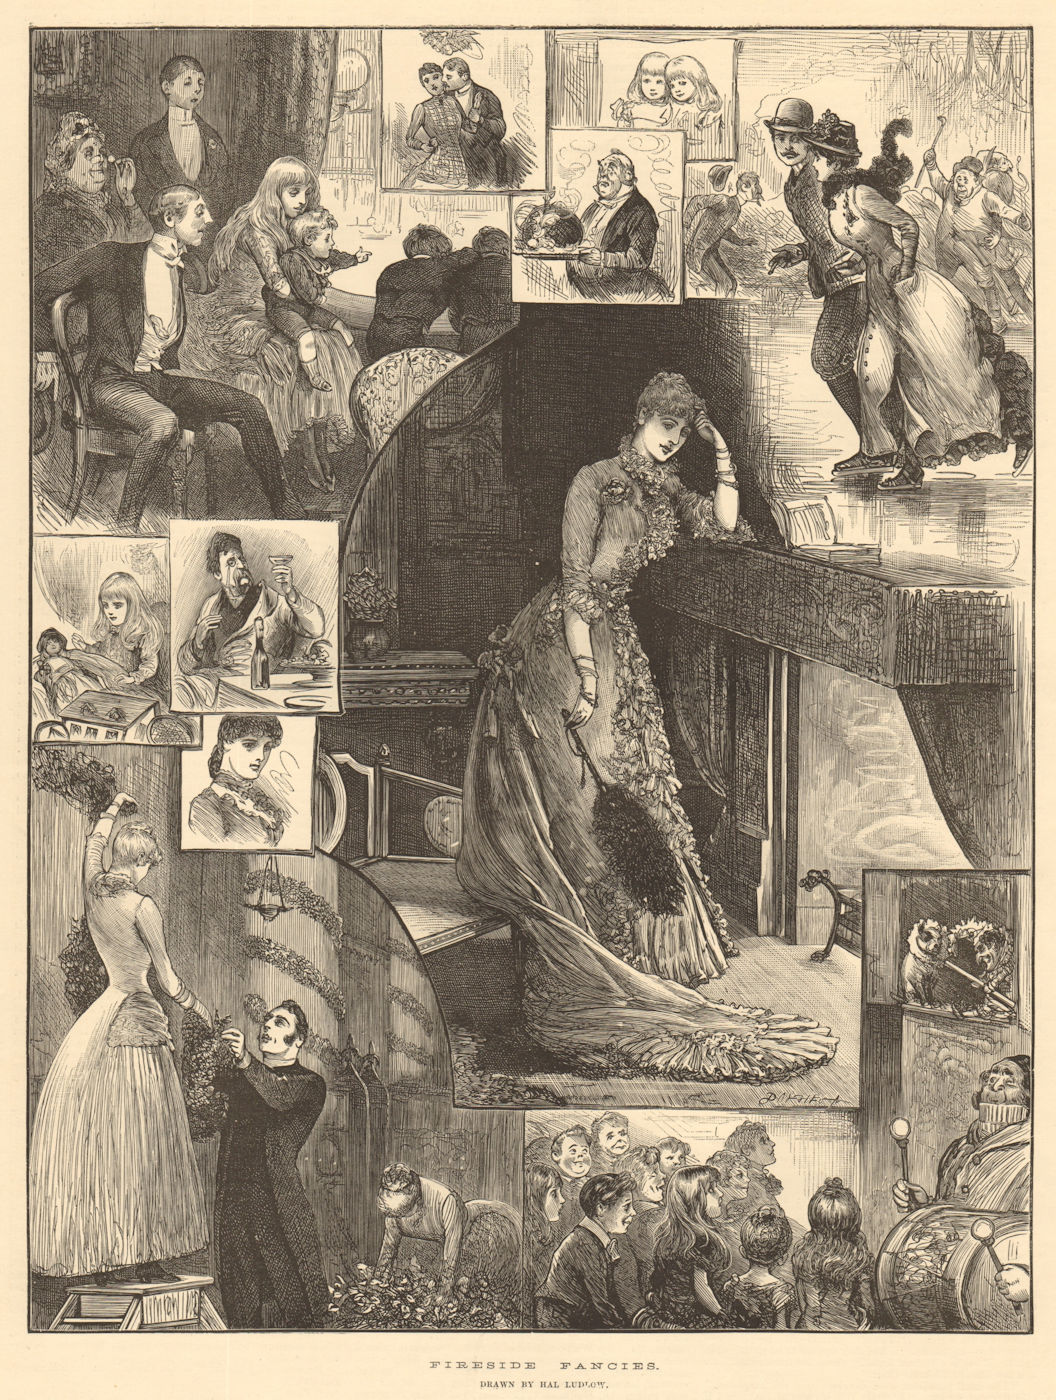 Associate Product Fireside fancies. Drawn by Hal Ludlow. Romance 1883 antique ILN full page print